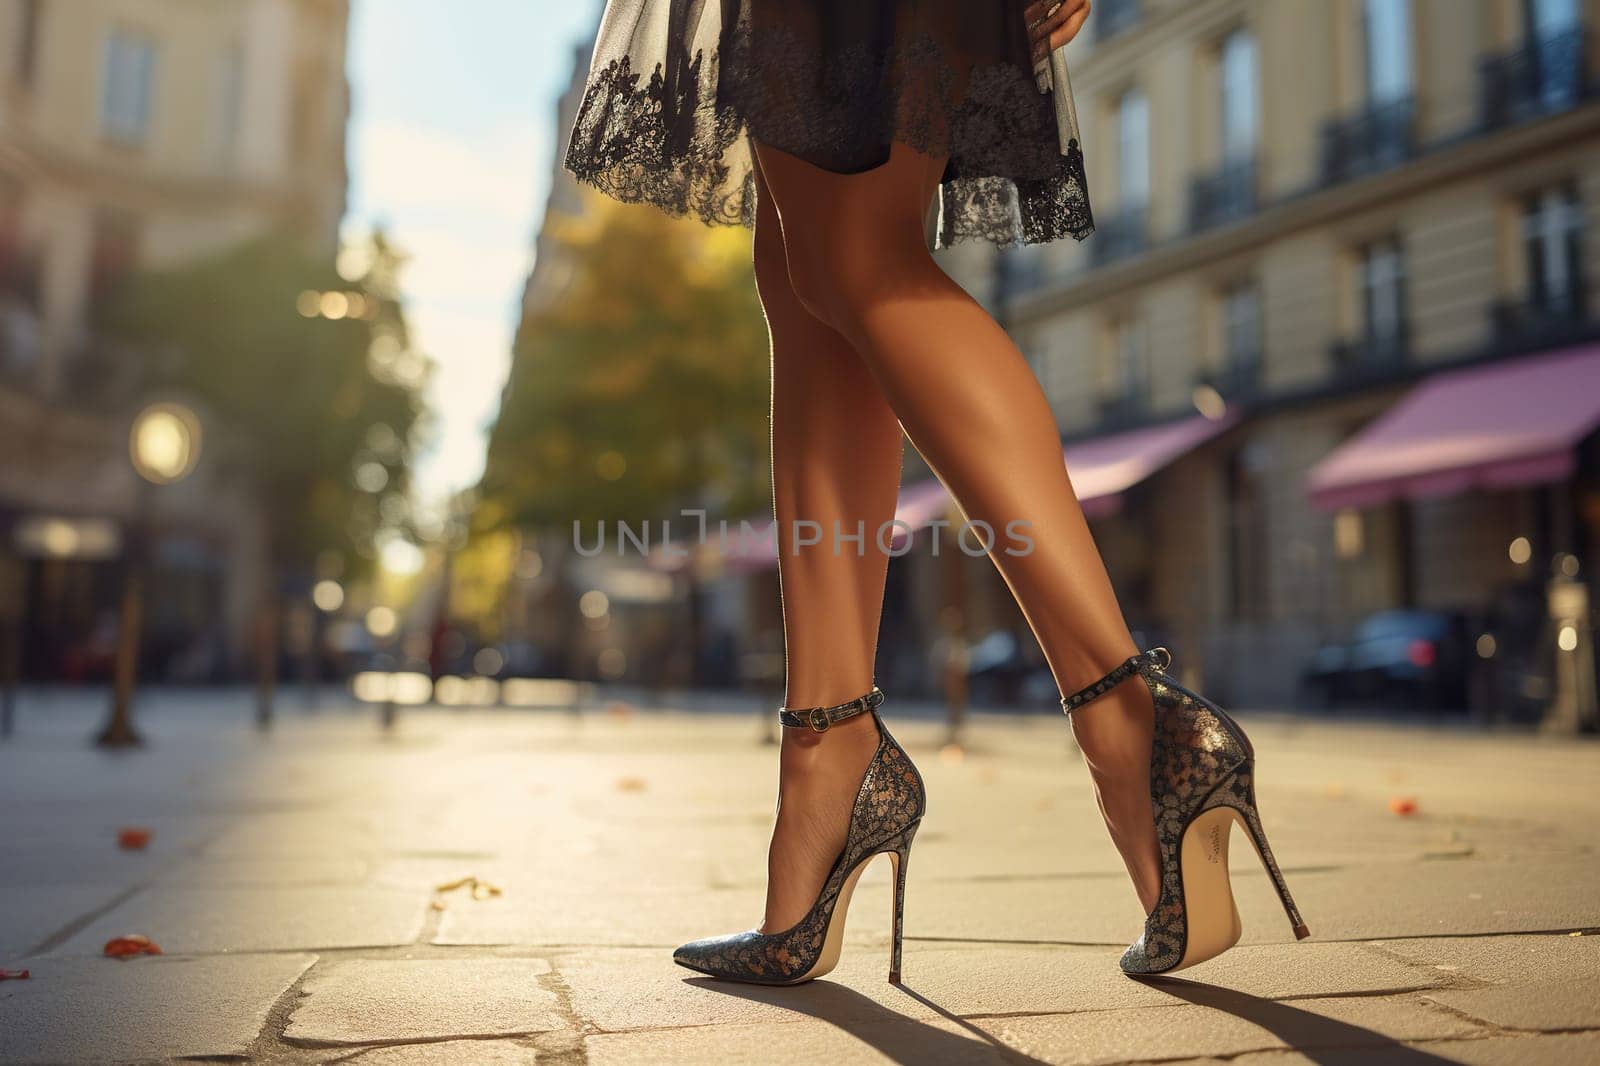 Slender female legs in high-heeled shoes on a city street. Generated by artificial intelligence by Vovmar